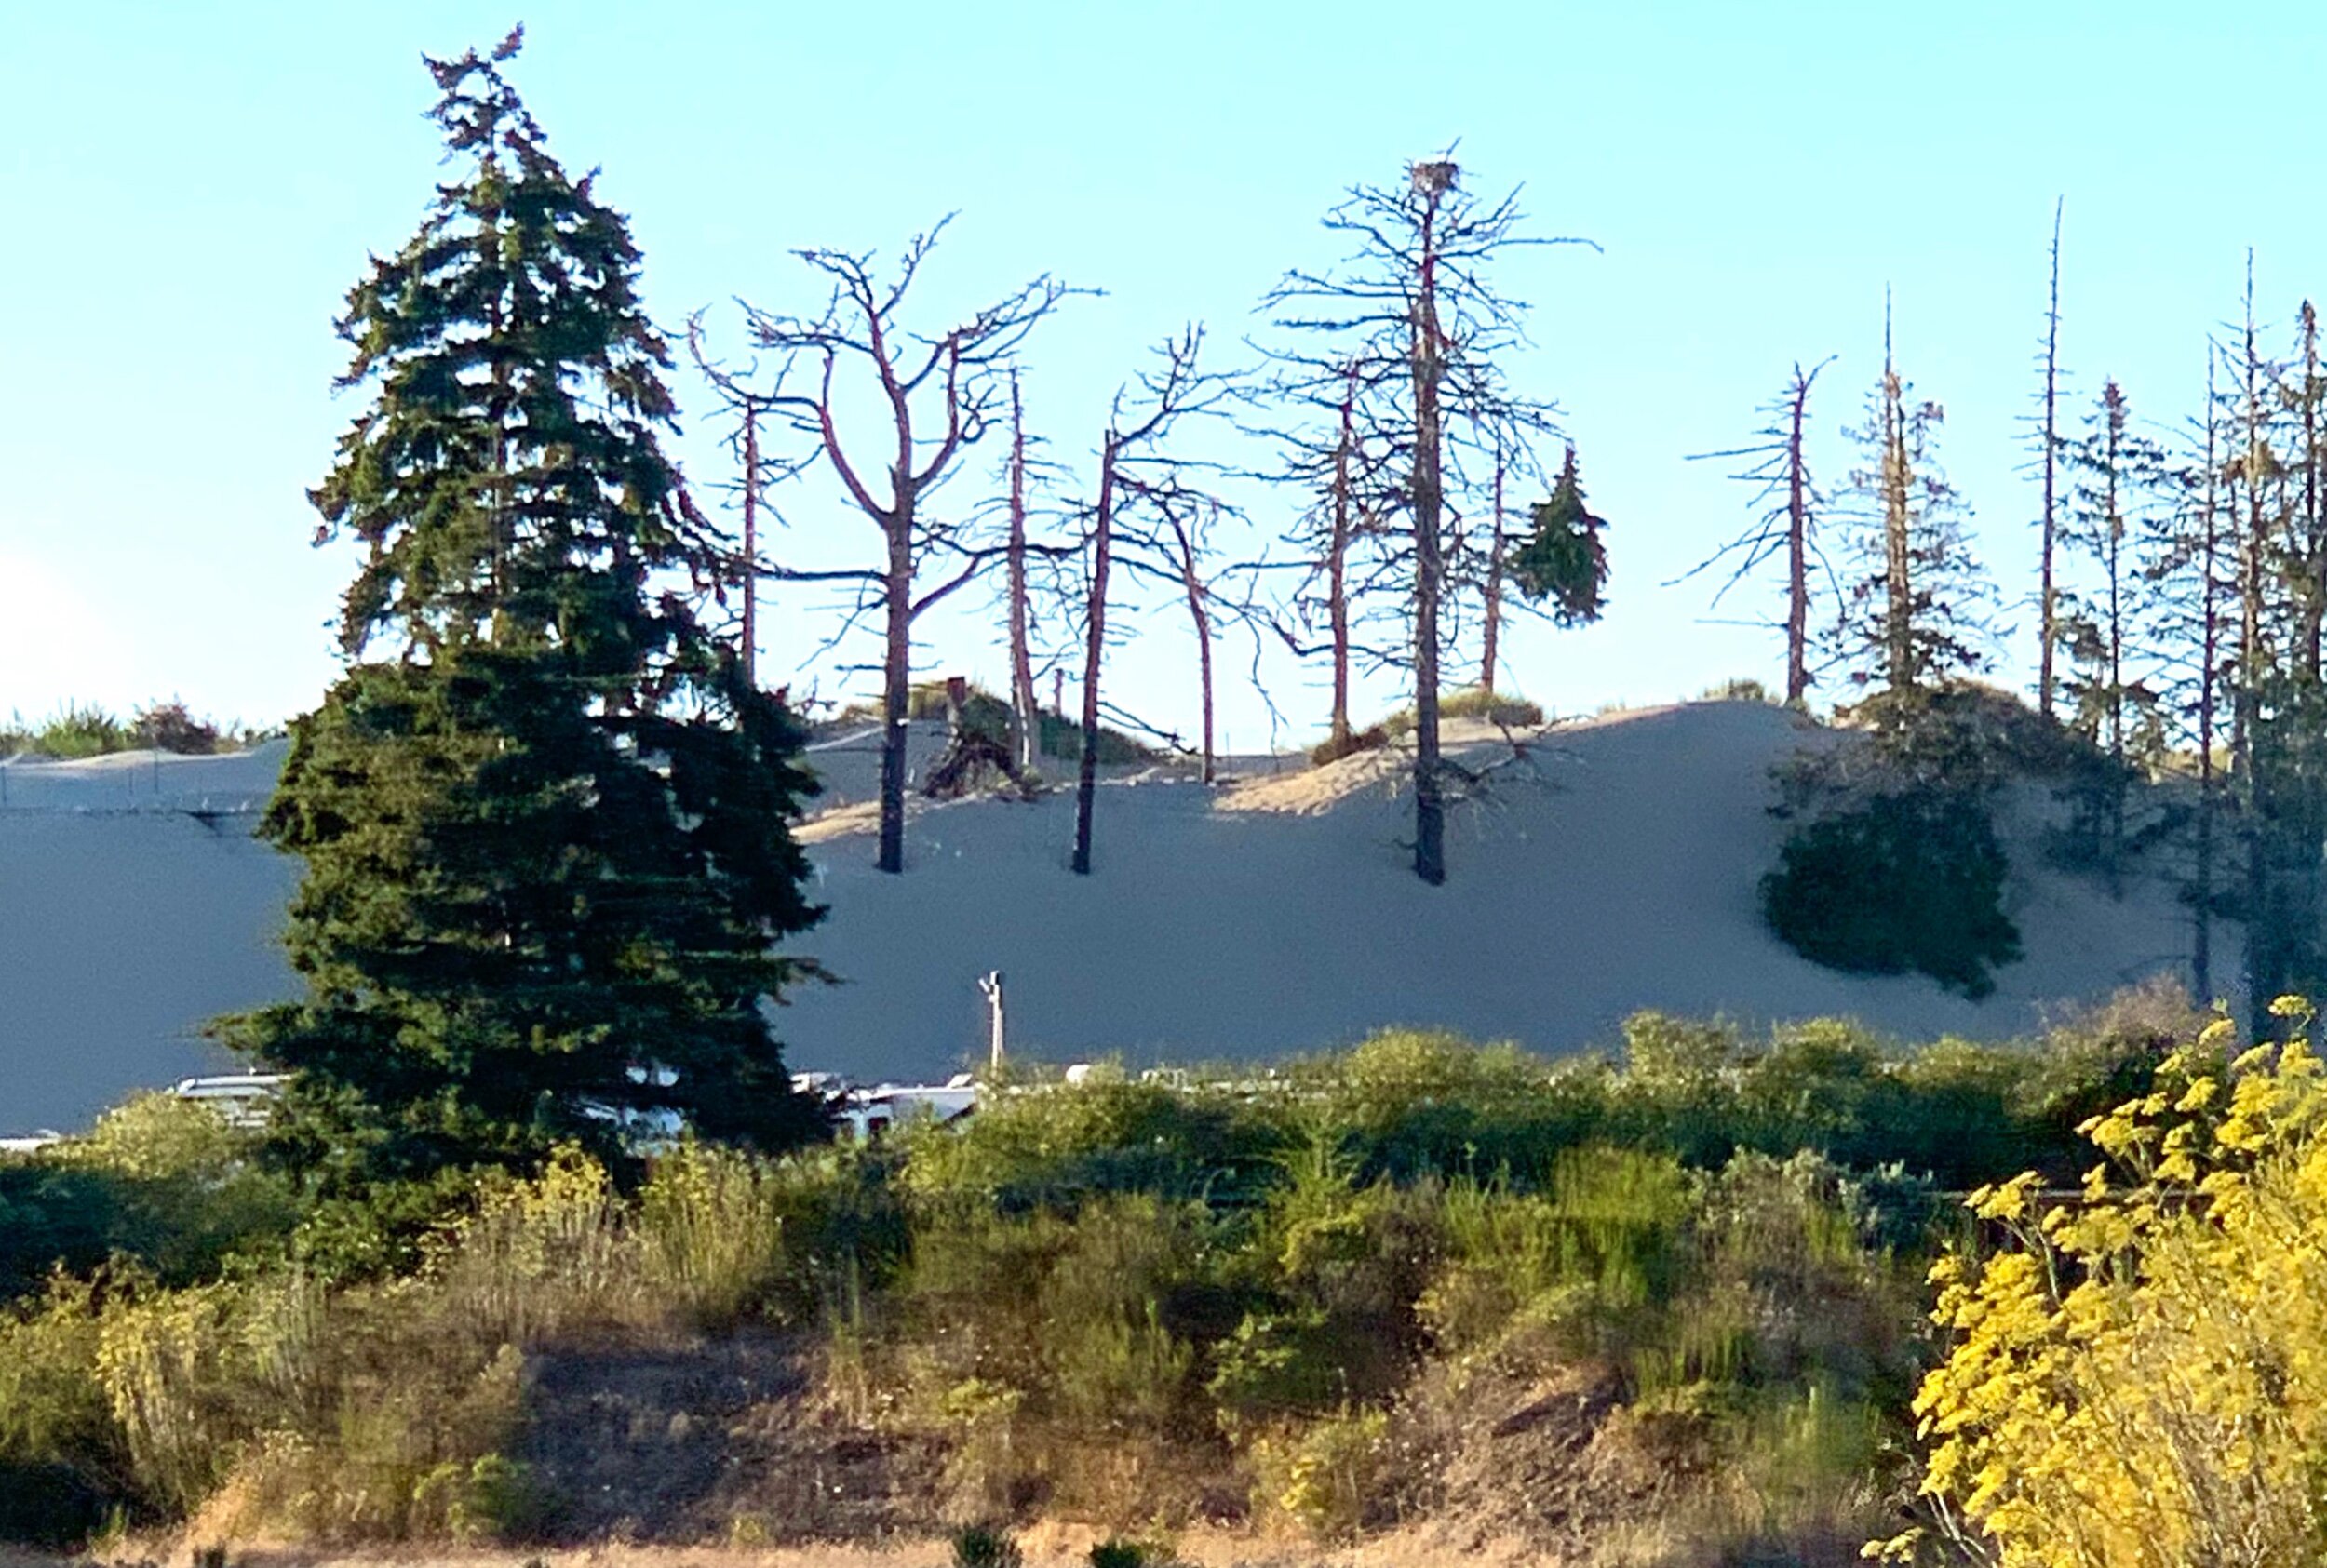  In North Bend, I thought the large sand dunes away from water were remarkable. Also interesting how the trees grow out of the dunes.  